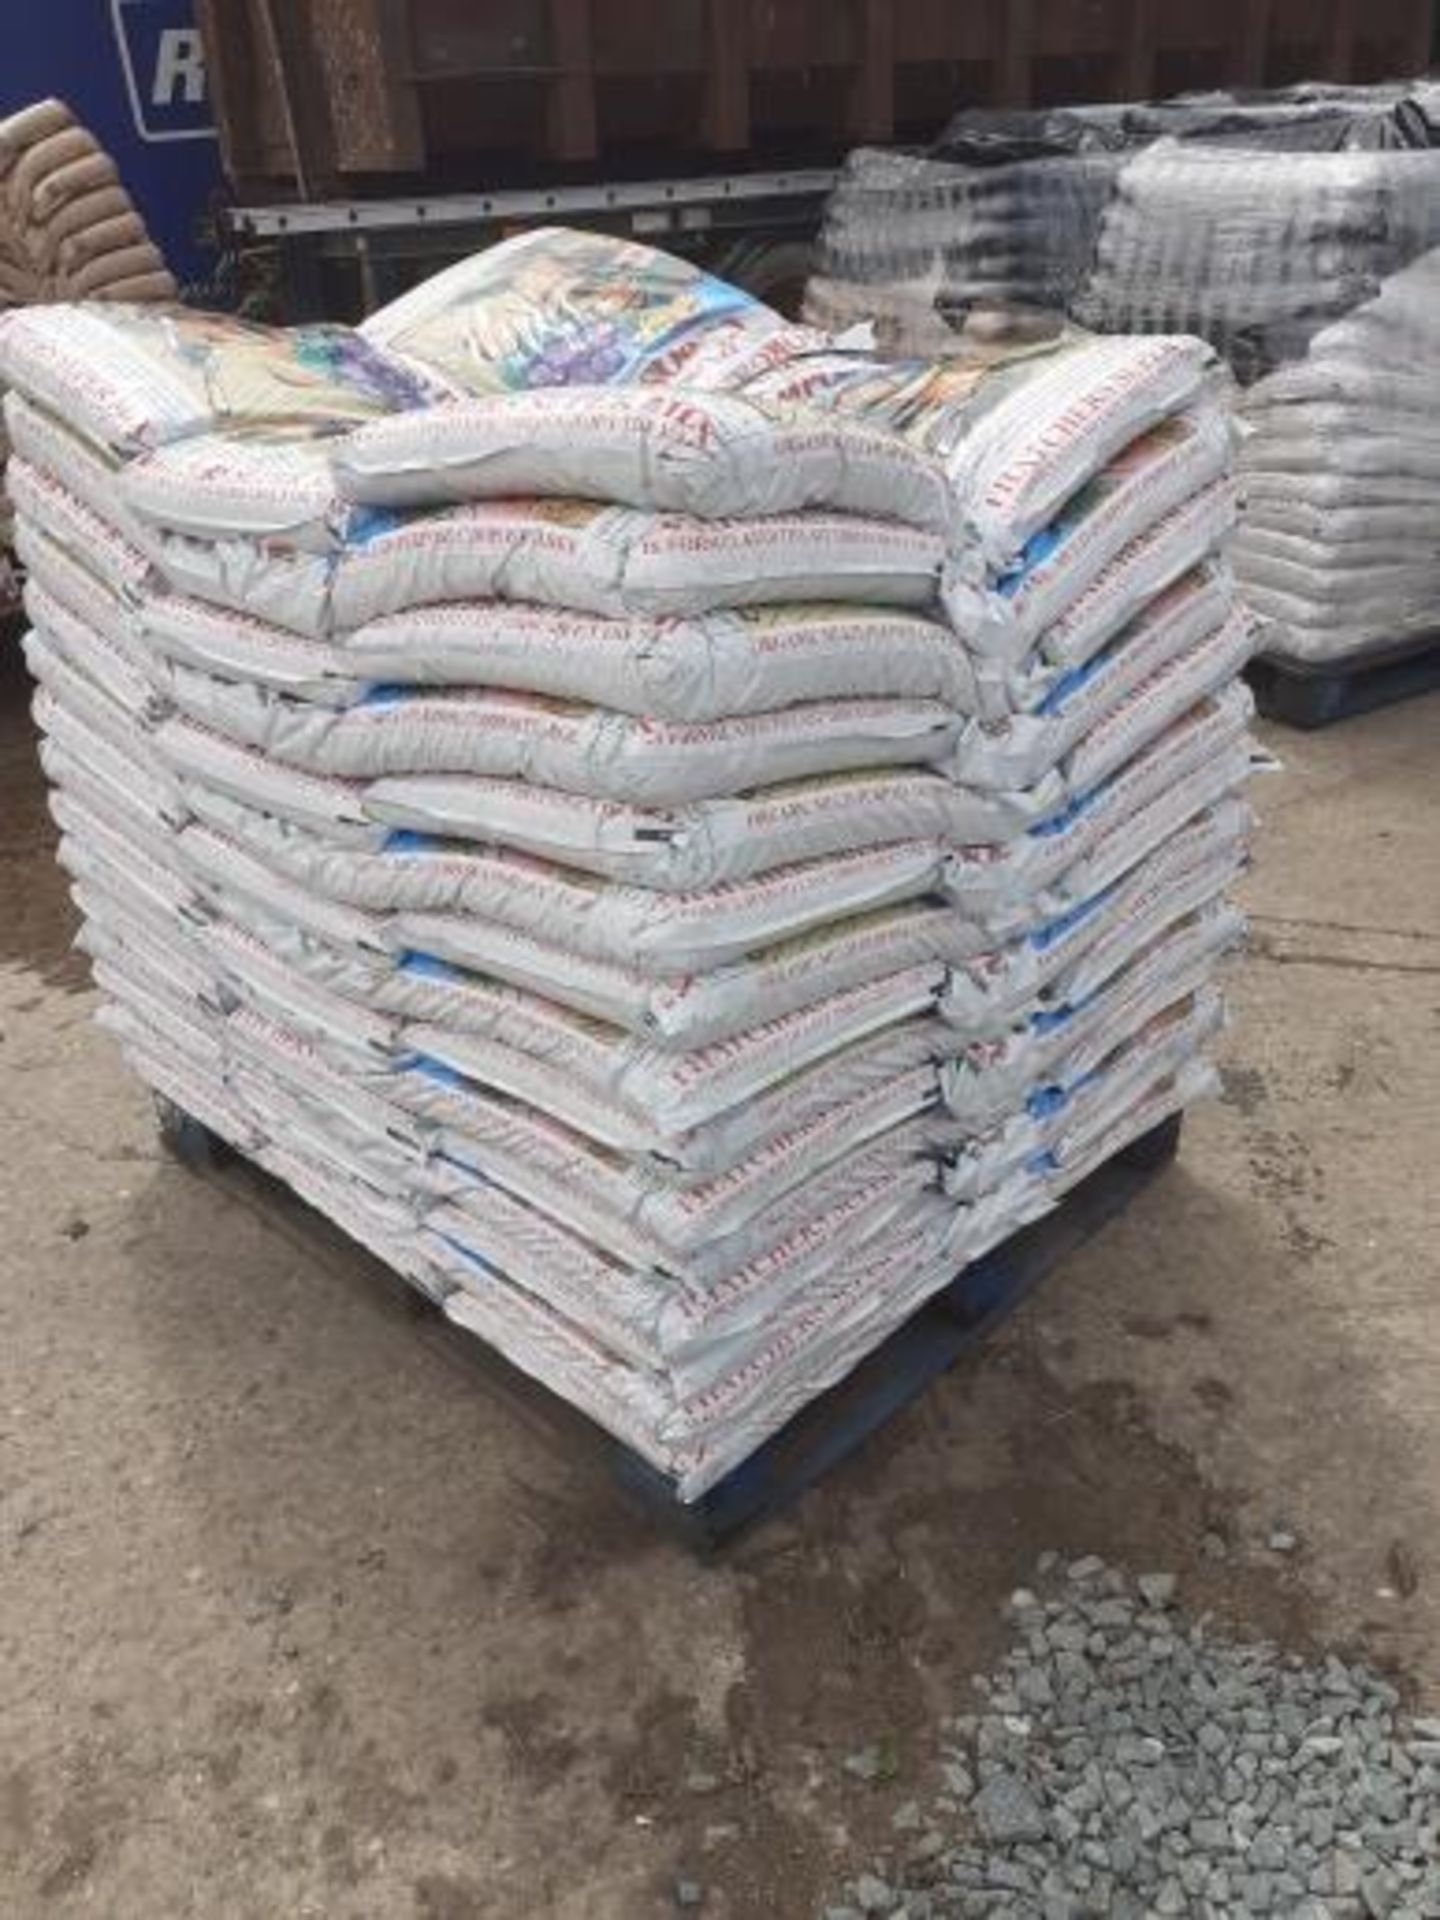 1 PALLET OF TOP GRADE COMPOST, EACH BAG CONTAINS 40 LITRES, 75 BAGS PER PALLET, APPROX WEIGHT 800kg - Image 3 of 4